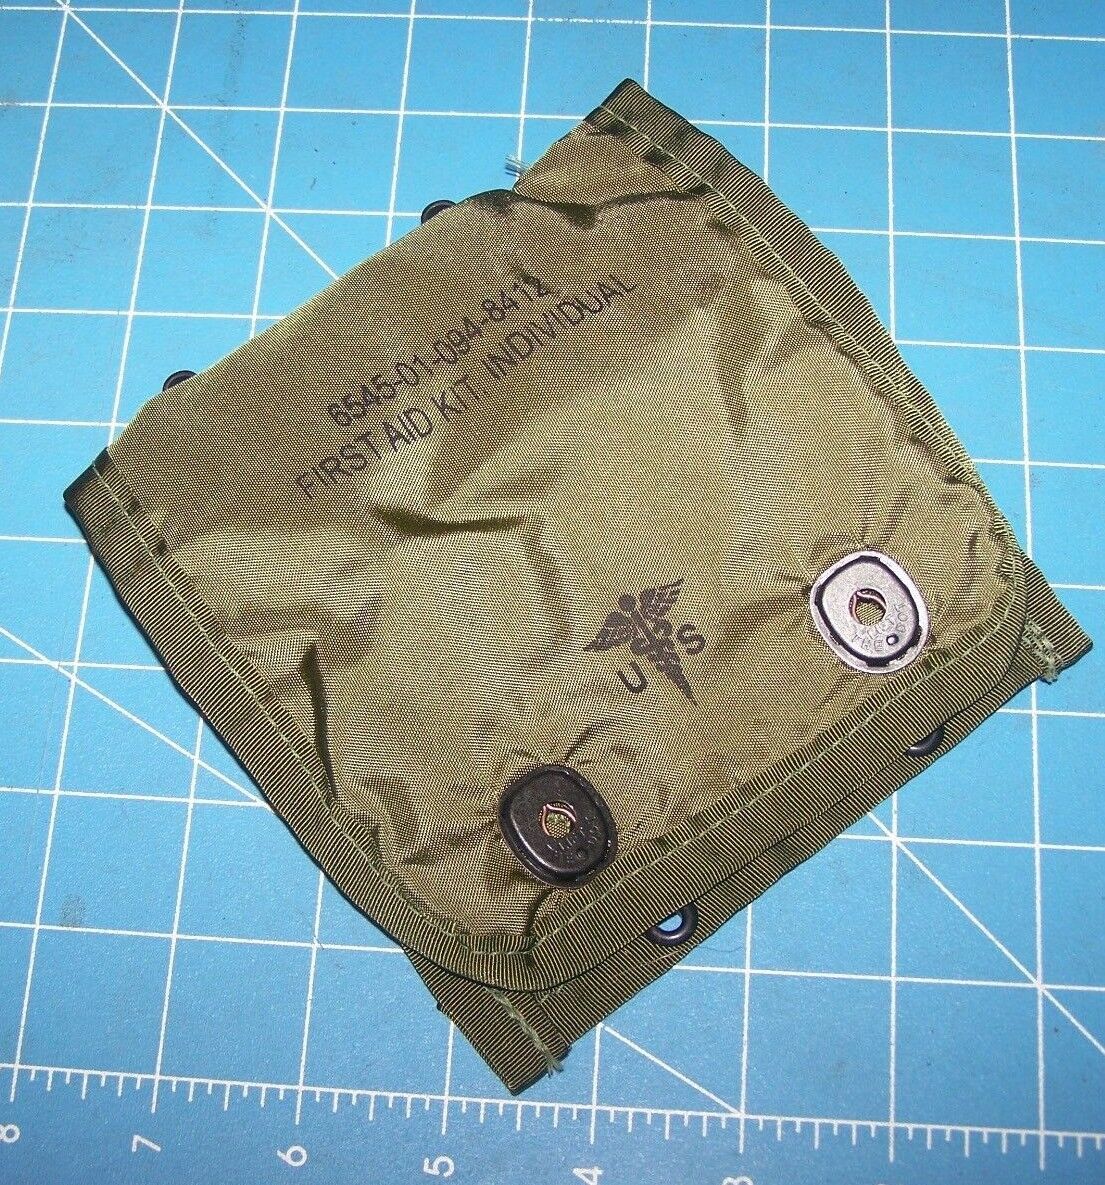 Medic Pouch First Aid Military Army Usmc New Genuine Issue Alice W Shelby P38